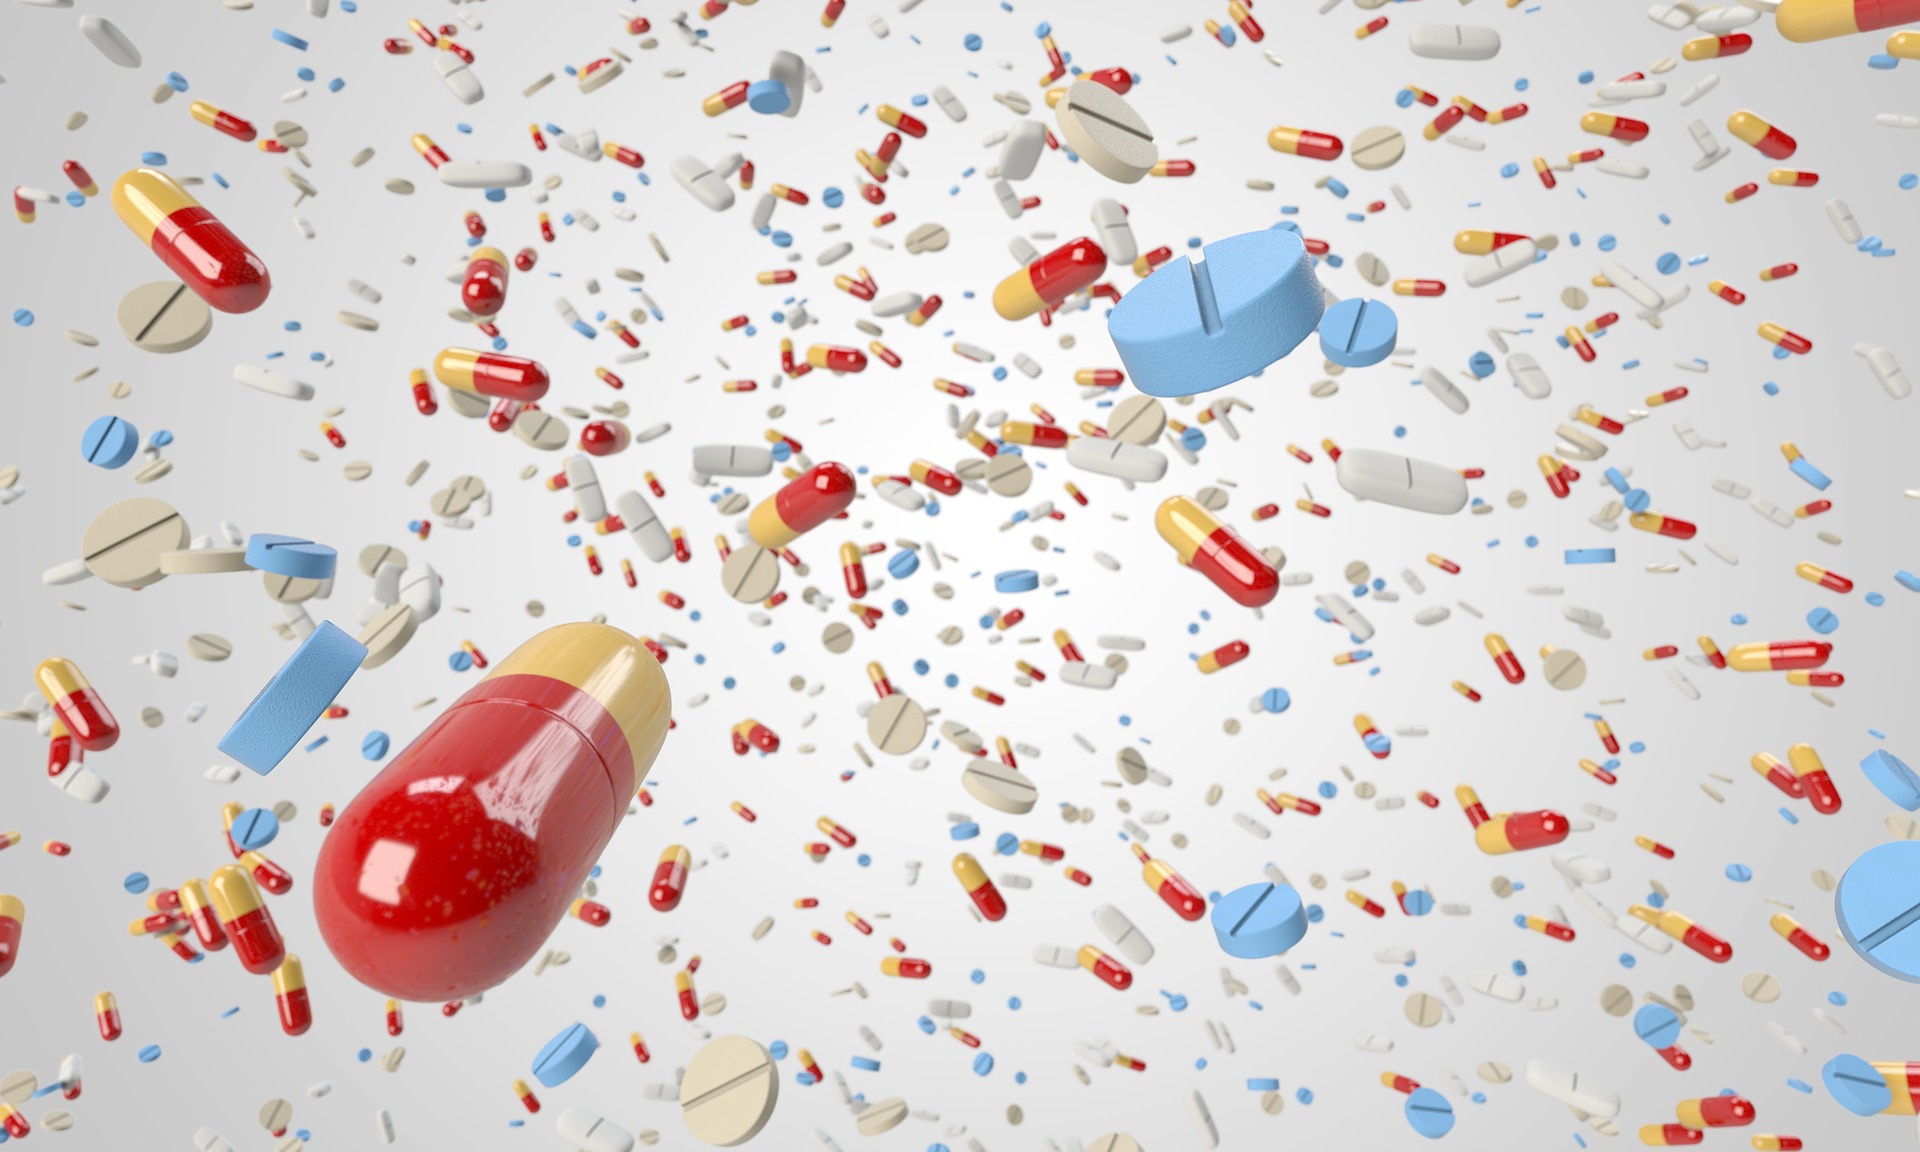 The Brief and Poorly Known History of Some of the Most Commonly Used Drugs